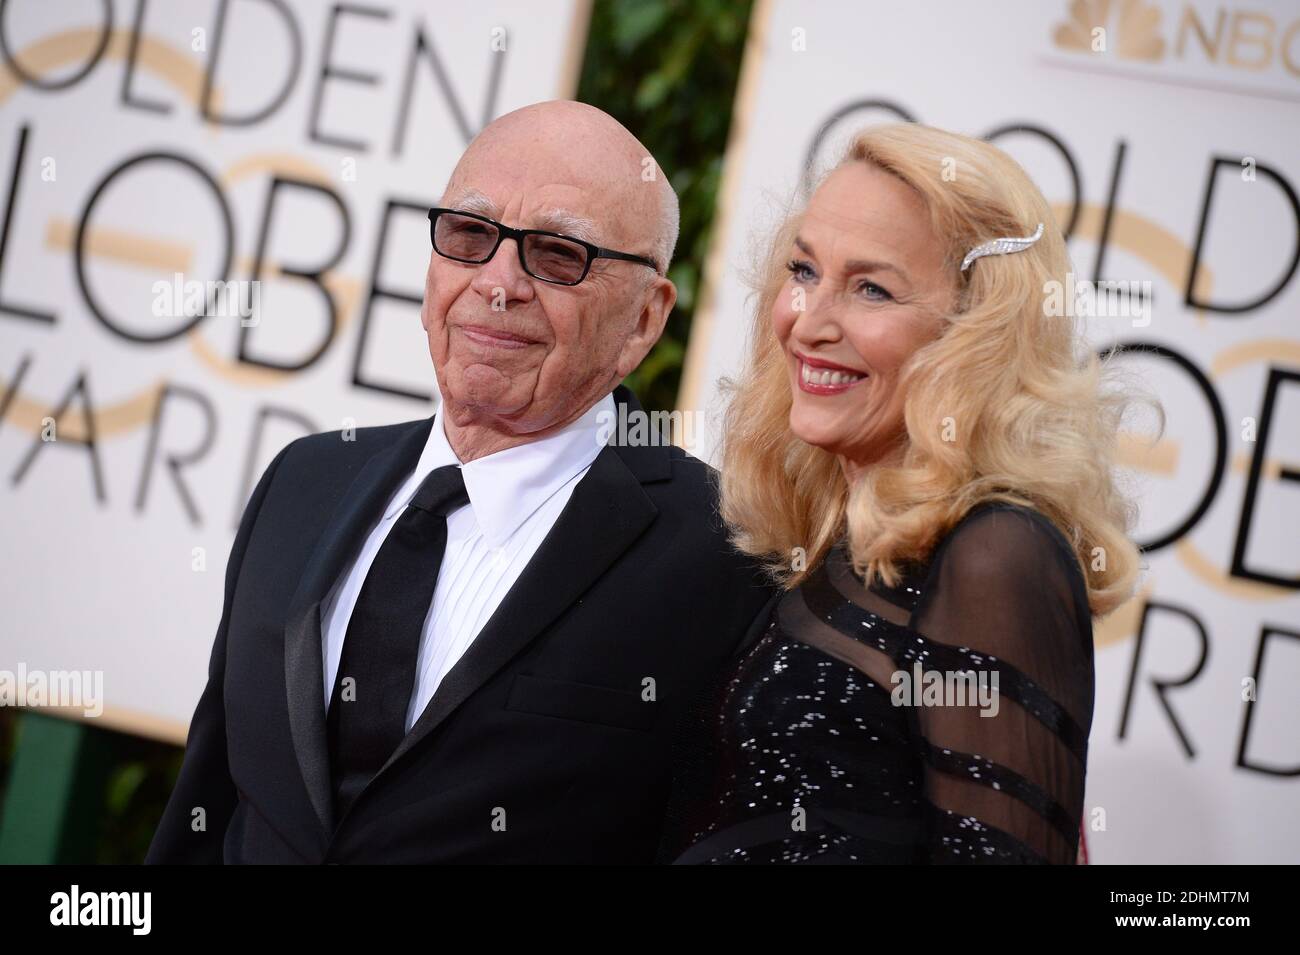 File photo : Jerry Hall and Rupert Murdoch attend the 73rd Annual Golden Globe Awards held at the Beverly Hilton Hotel in Los Angeles, CA, USA, January 10, 2016. Media mogul Rupert Murdoch and former supermodel Jerry Hall have announced their engagement after a whirlwind four-month romance. Mr Murdoch, 84, the executive chairman of News Corporation, which owns The Times, announced the news on the Births, Marriages and Deaths page of the newspaper. Photo by Lionel Hahn/ABACAPRESS.COM Stock Photo